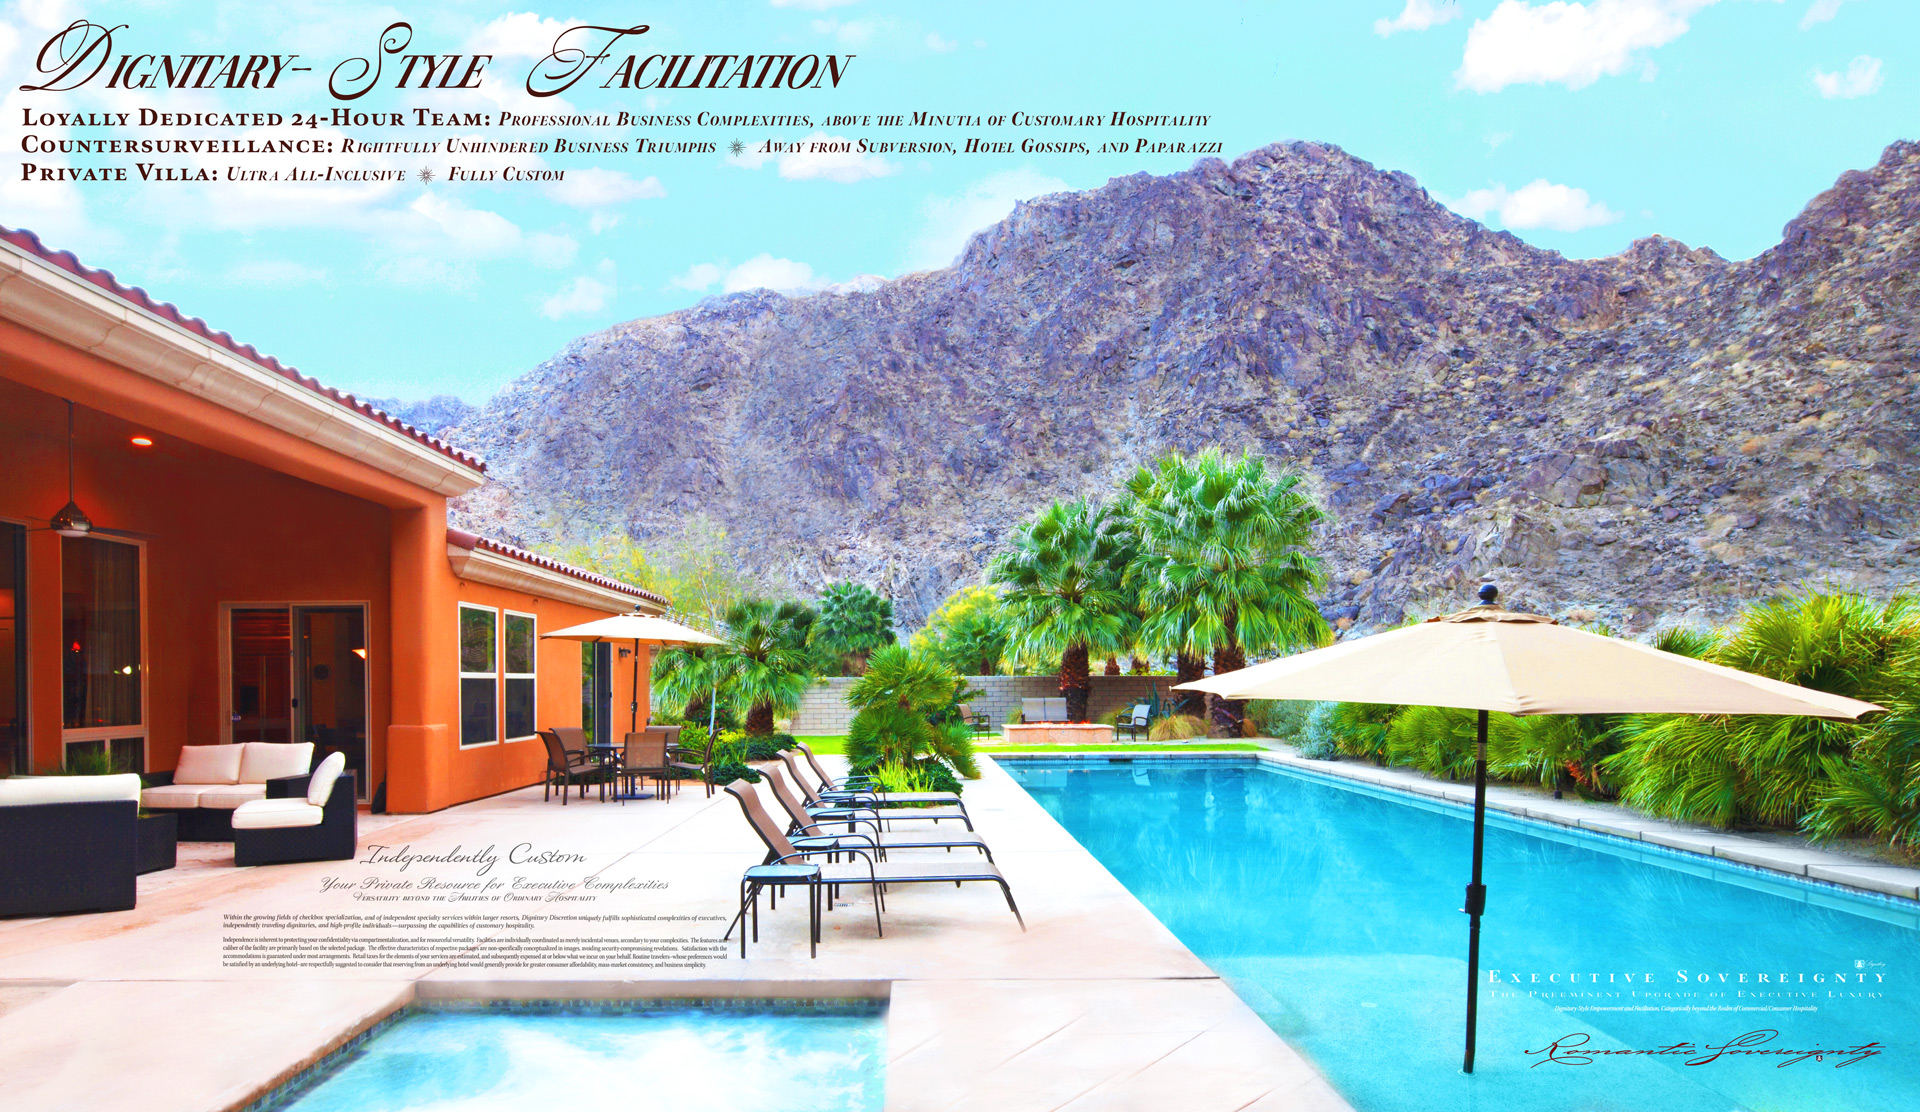 Surpassing Five Star Hotels near Palm Springs